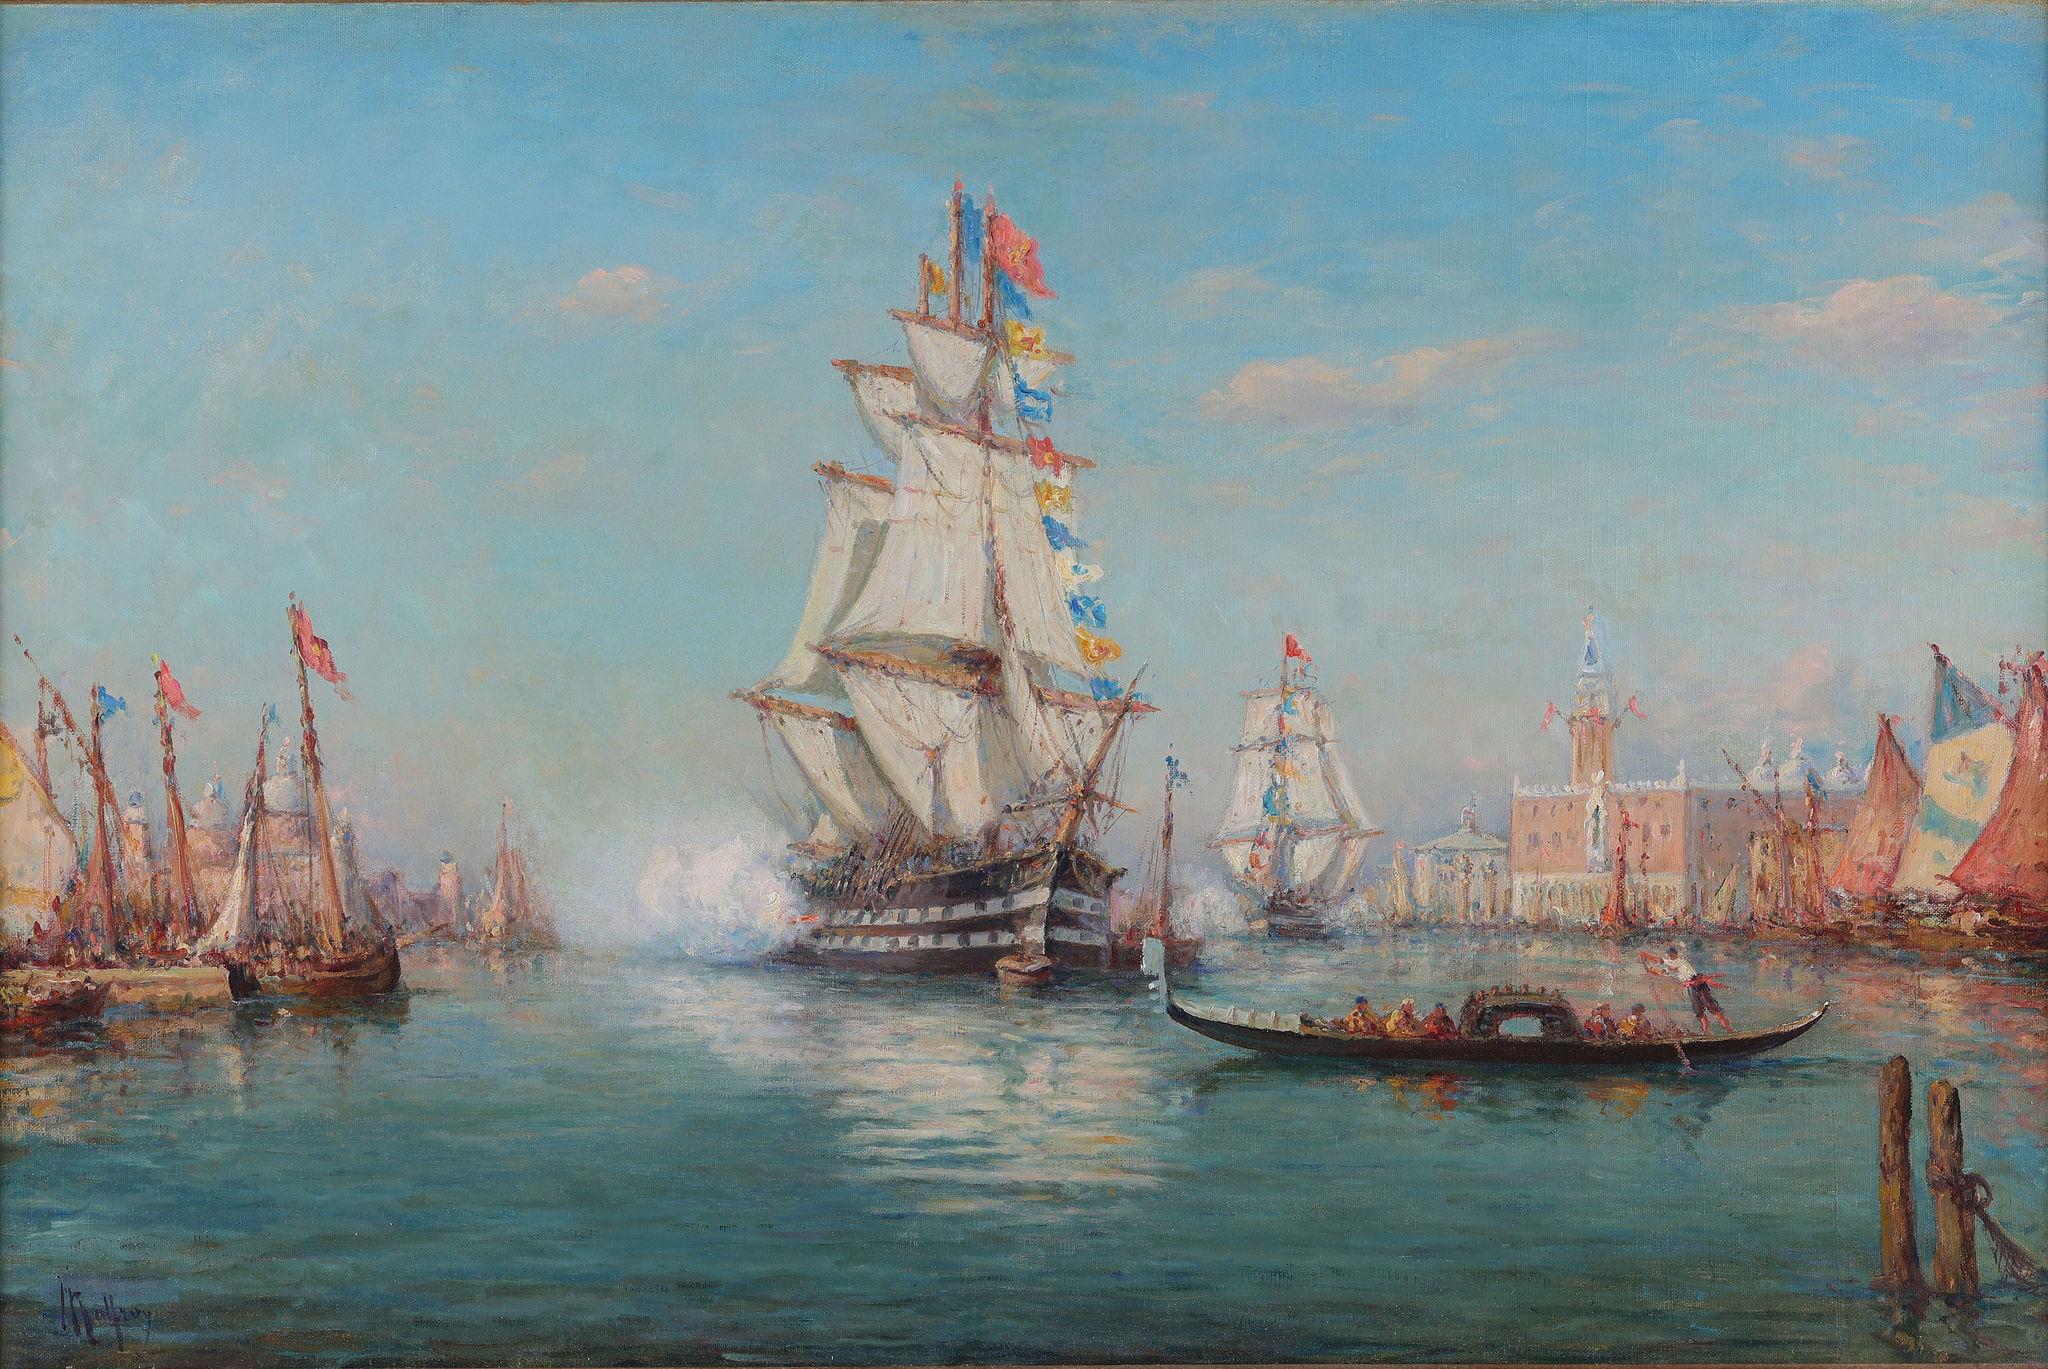 'Salut De Venice' The Homecoming . Venice - Painting by Henry Malfroy